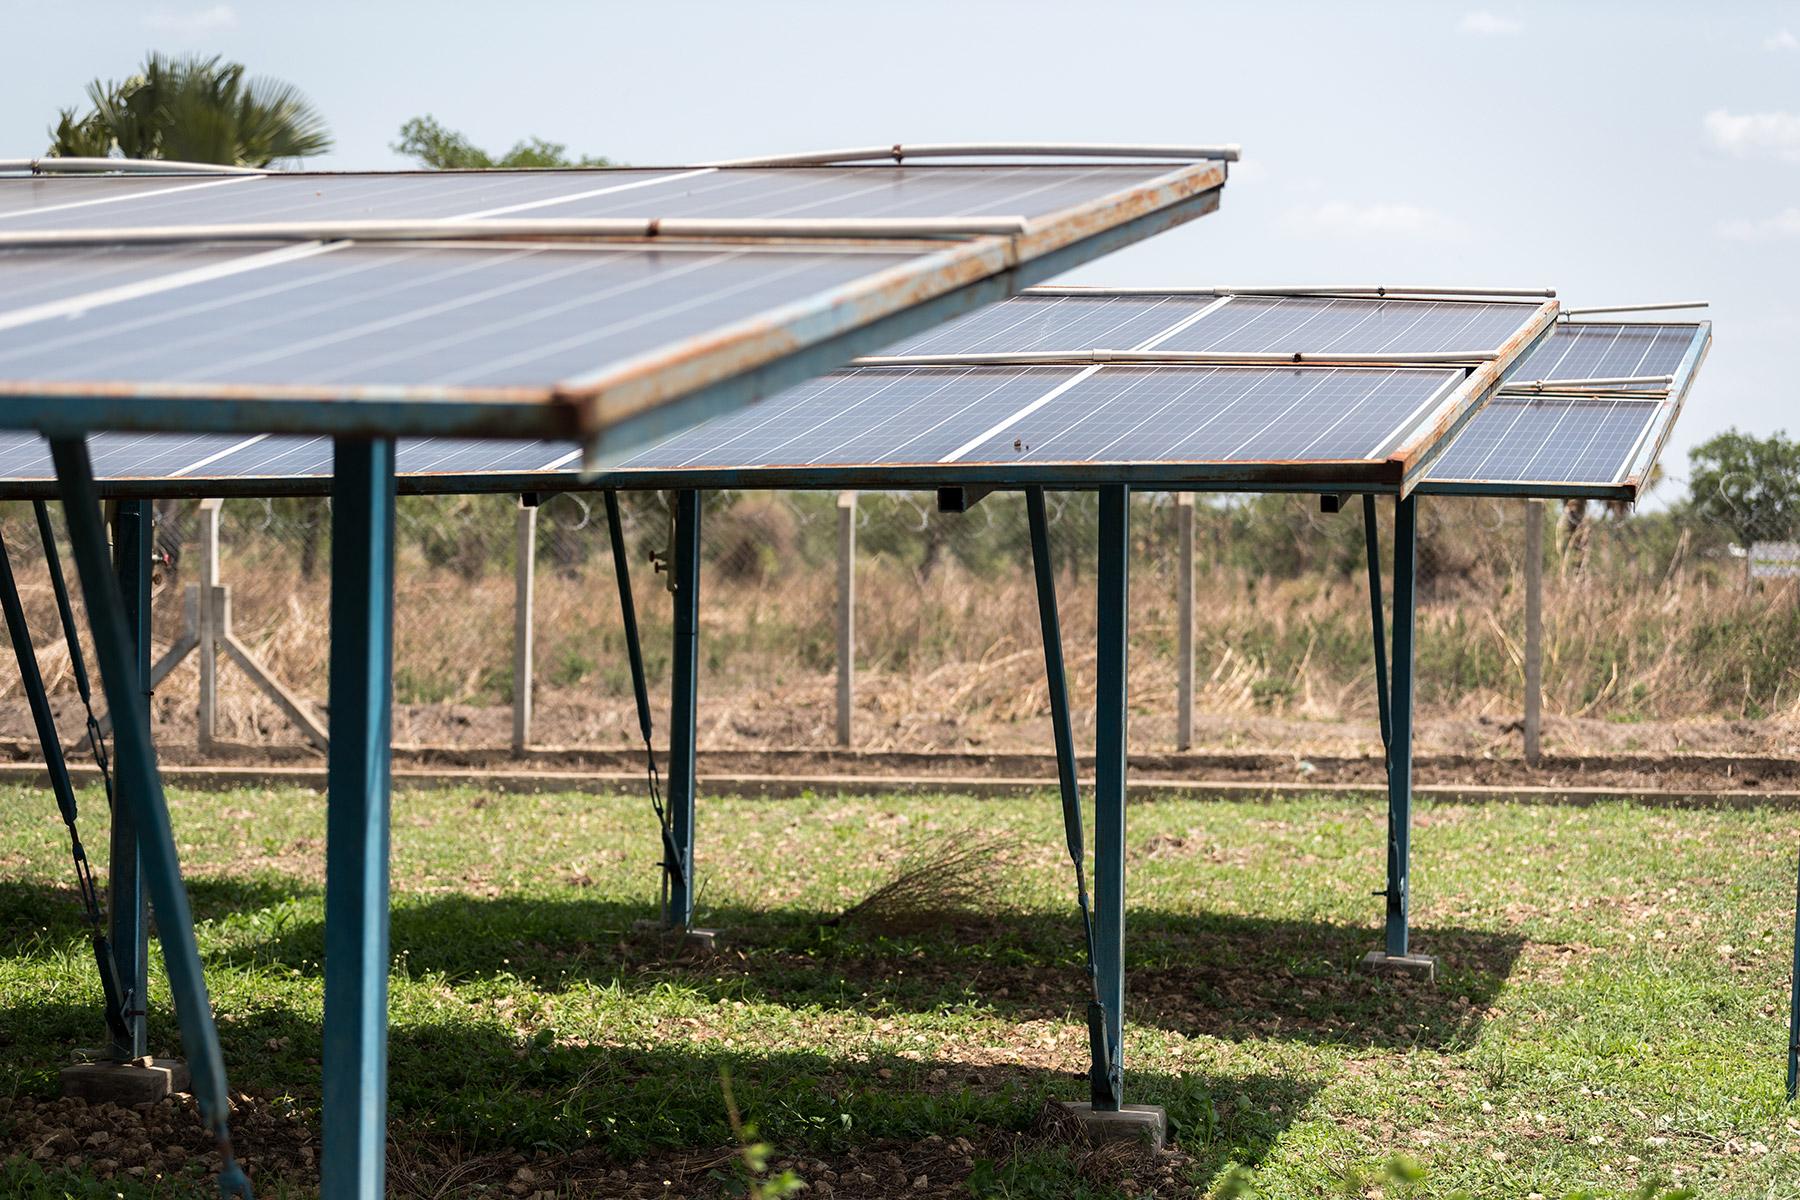 Solar panels for a solar-powered motorized water pump in Orinya village, Palorinya settlement in Uganda. The LWF uses 14 hybrid solar-powered water pumps and an additional 152 hand-pumped boreholes to provide water for refugees. Photo: LWF/Albin Hillert